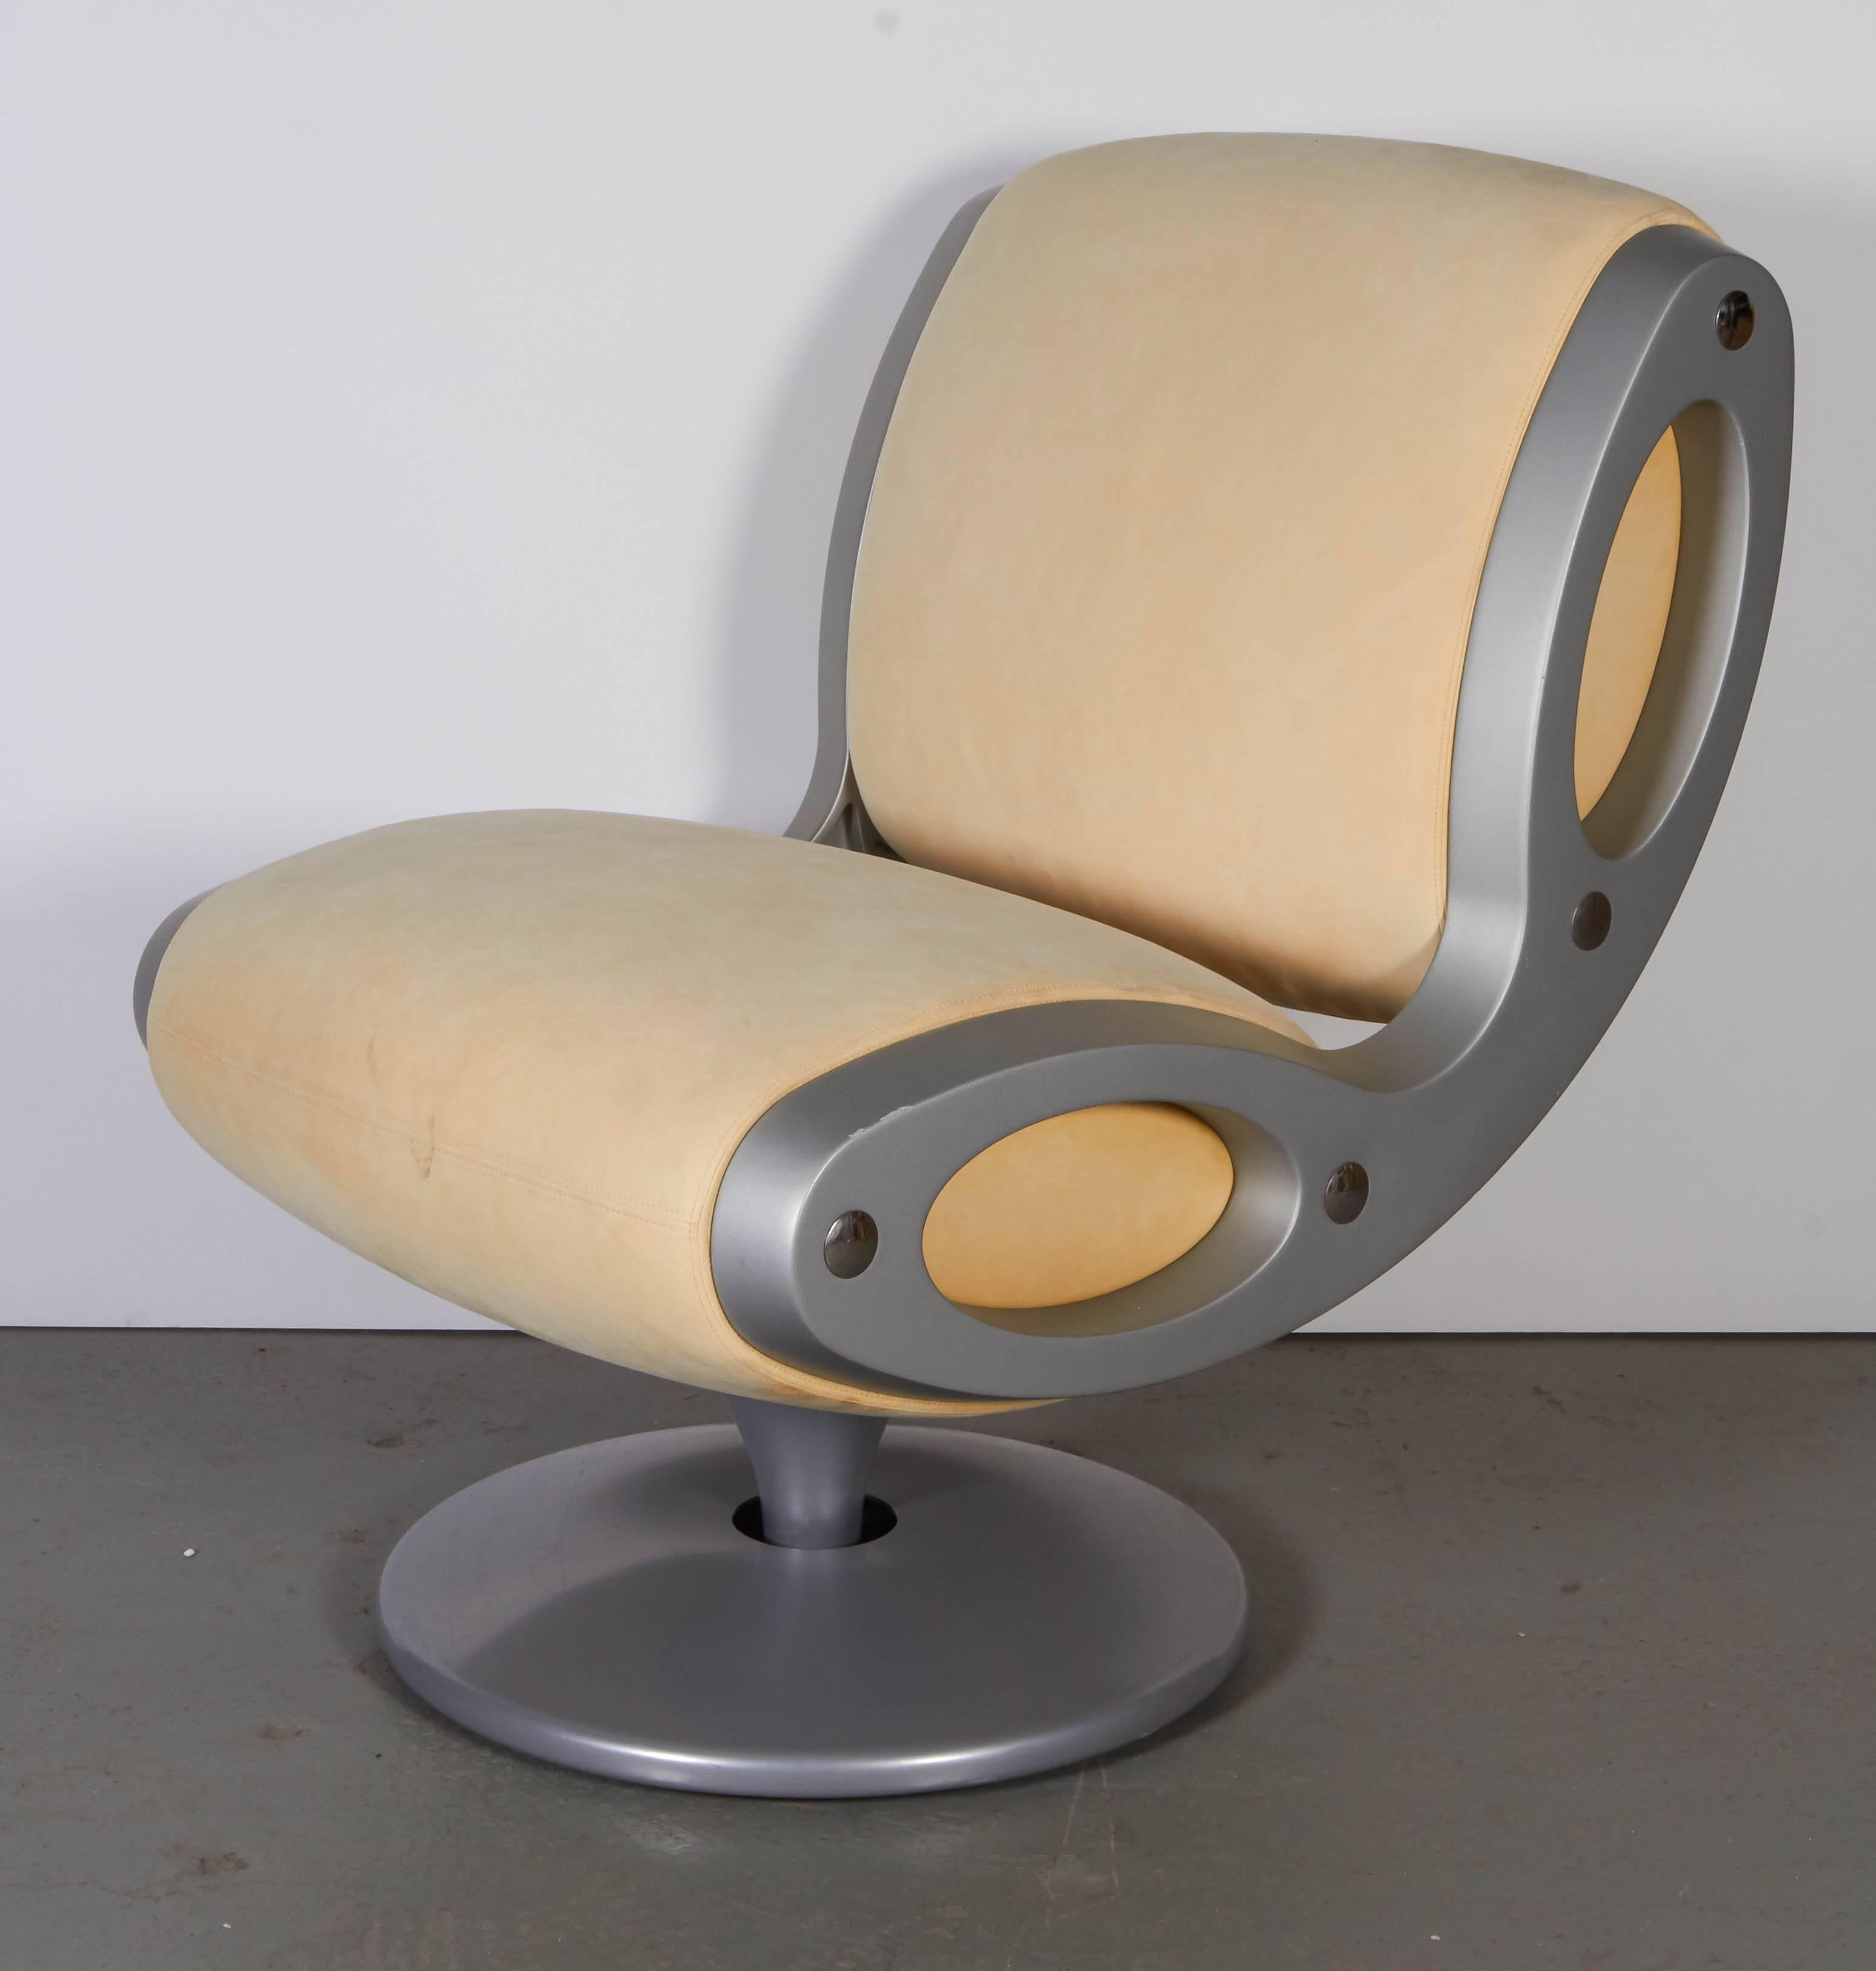 Marc Newson,
Swivel chair "GLUON" colored circular steel base with centre cut from which rises the barrel supporting the seat, grey tinted polyurethane, beige suede trim. Edition Moroso, circa 2000.
Bibliography: Giuliana Gramigna,